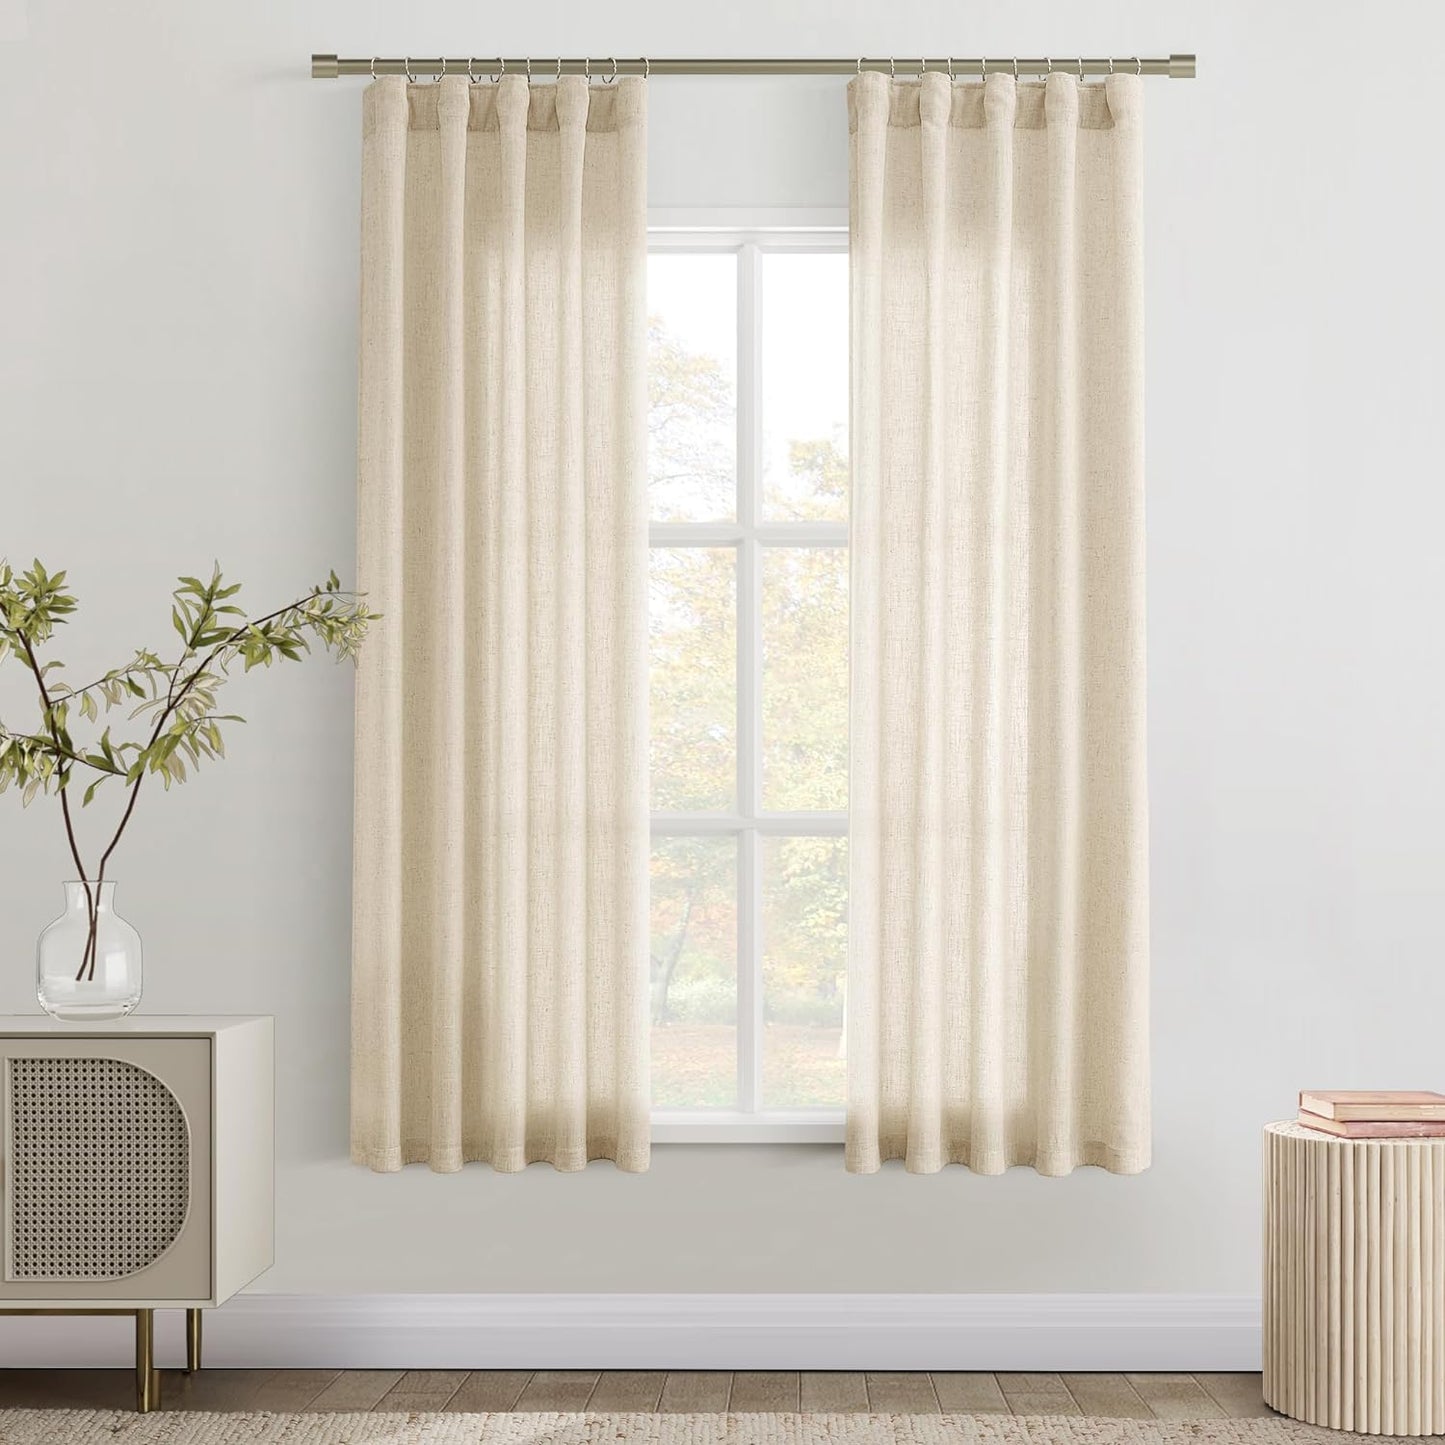 Joywell Natural Linen Cream Curtains 84 Inches Long for Living Room Bedroom Hook Belt Back Tab Pinch Pleated Light Filtering Ivory White Neutral Boho Modern Farmhouse Linen Drapes 84 Length 2 Panels  Joywell Sand Beige 38W X 63L Inch X 2 Panels 